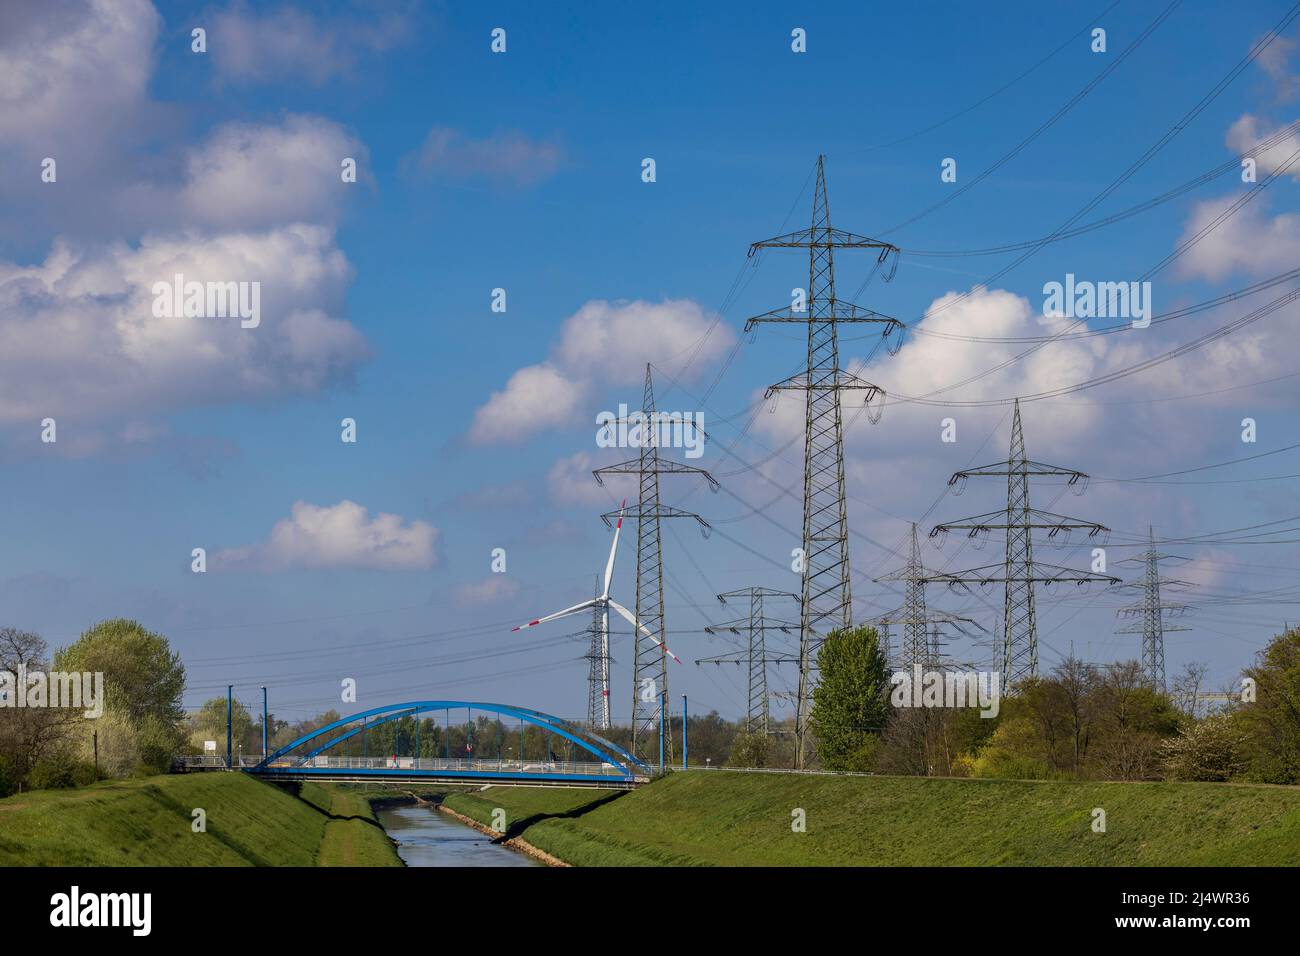 High voltage electricity pylons and power lines near RWE Generation SE waste-to-energy plant, Karnap, Essen, Germany Stock Photo